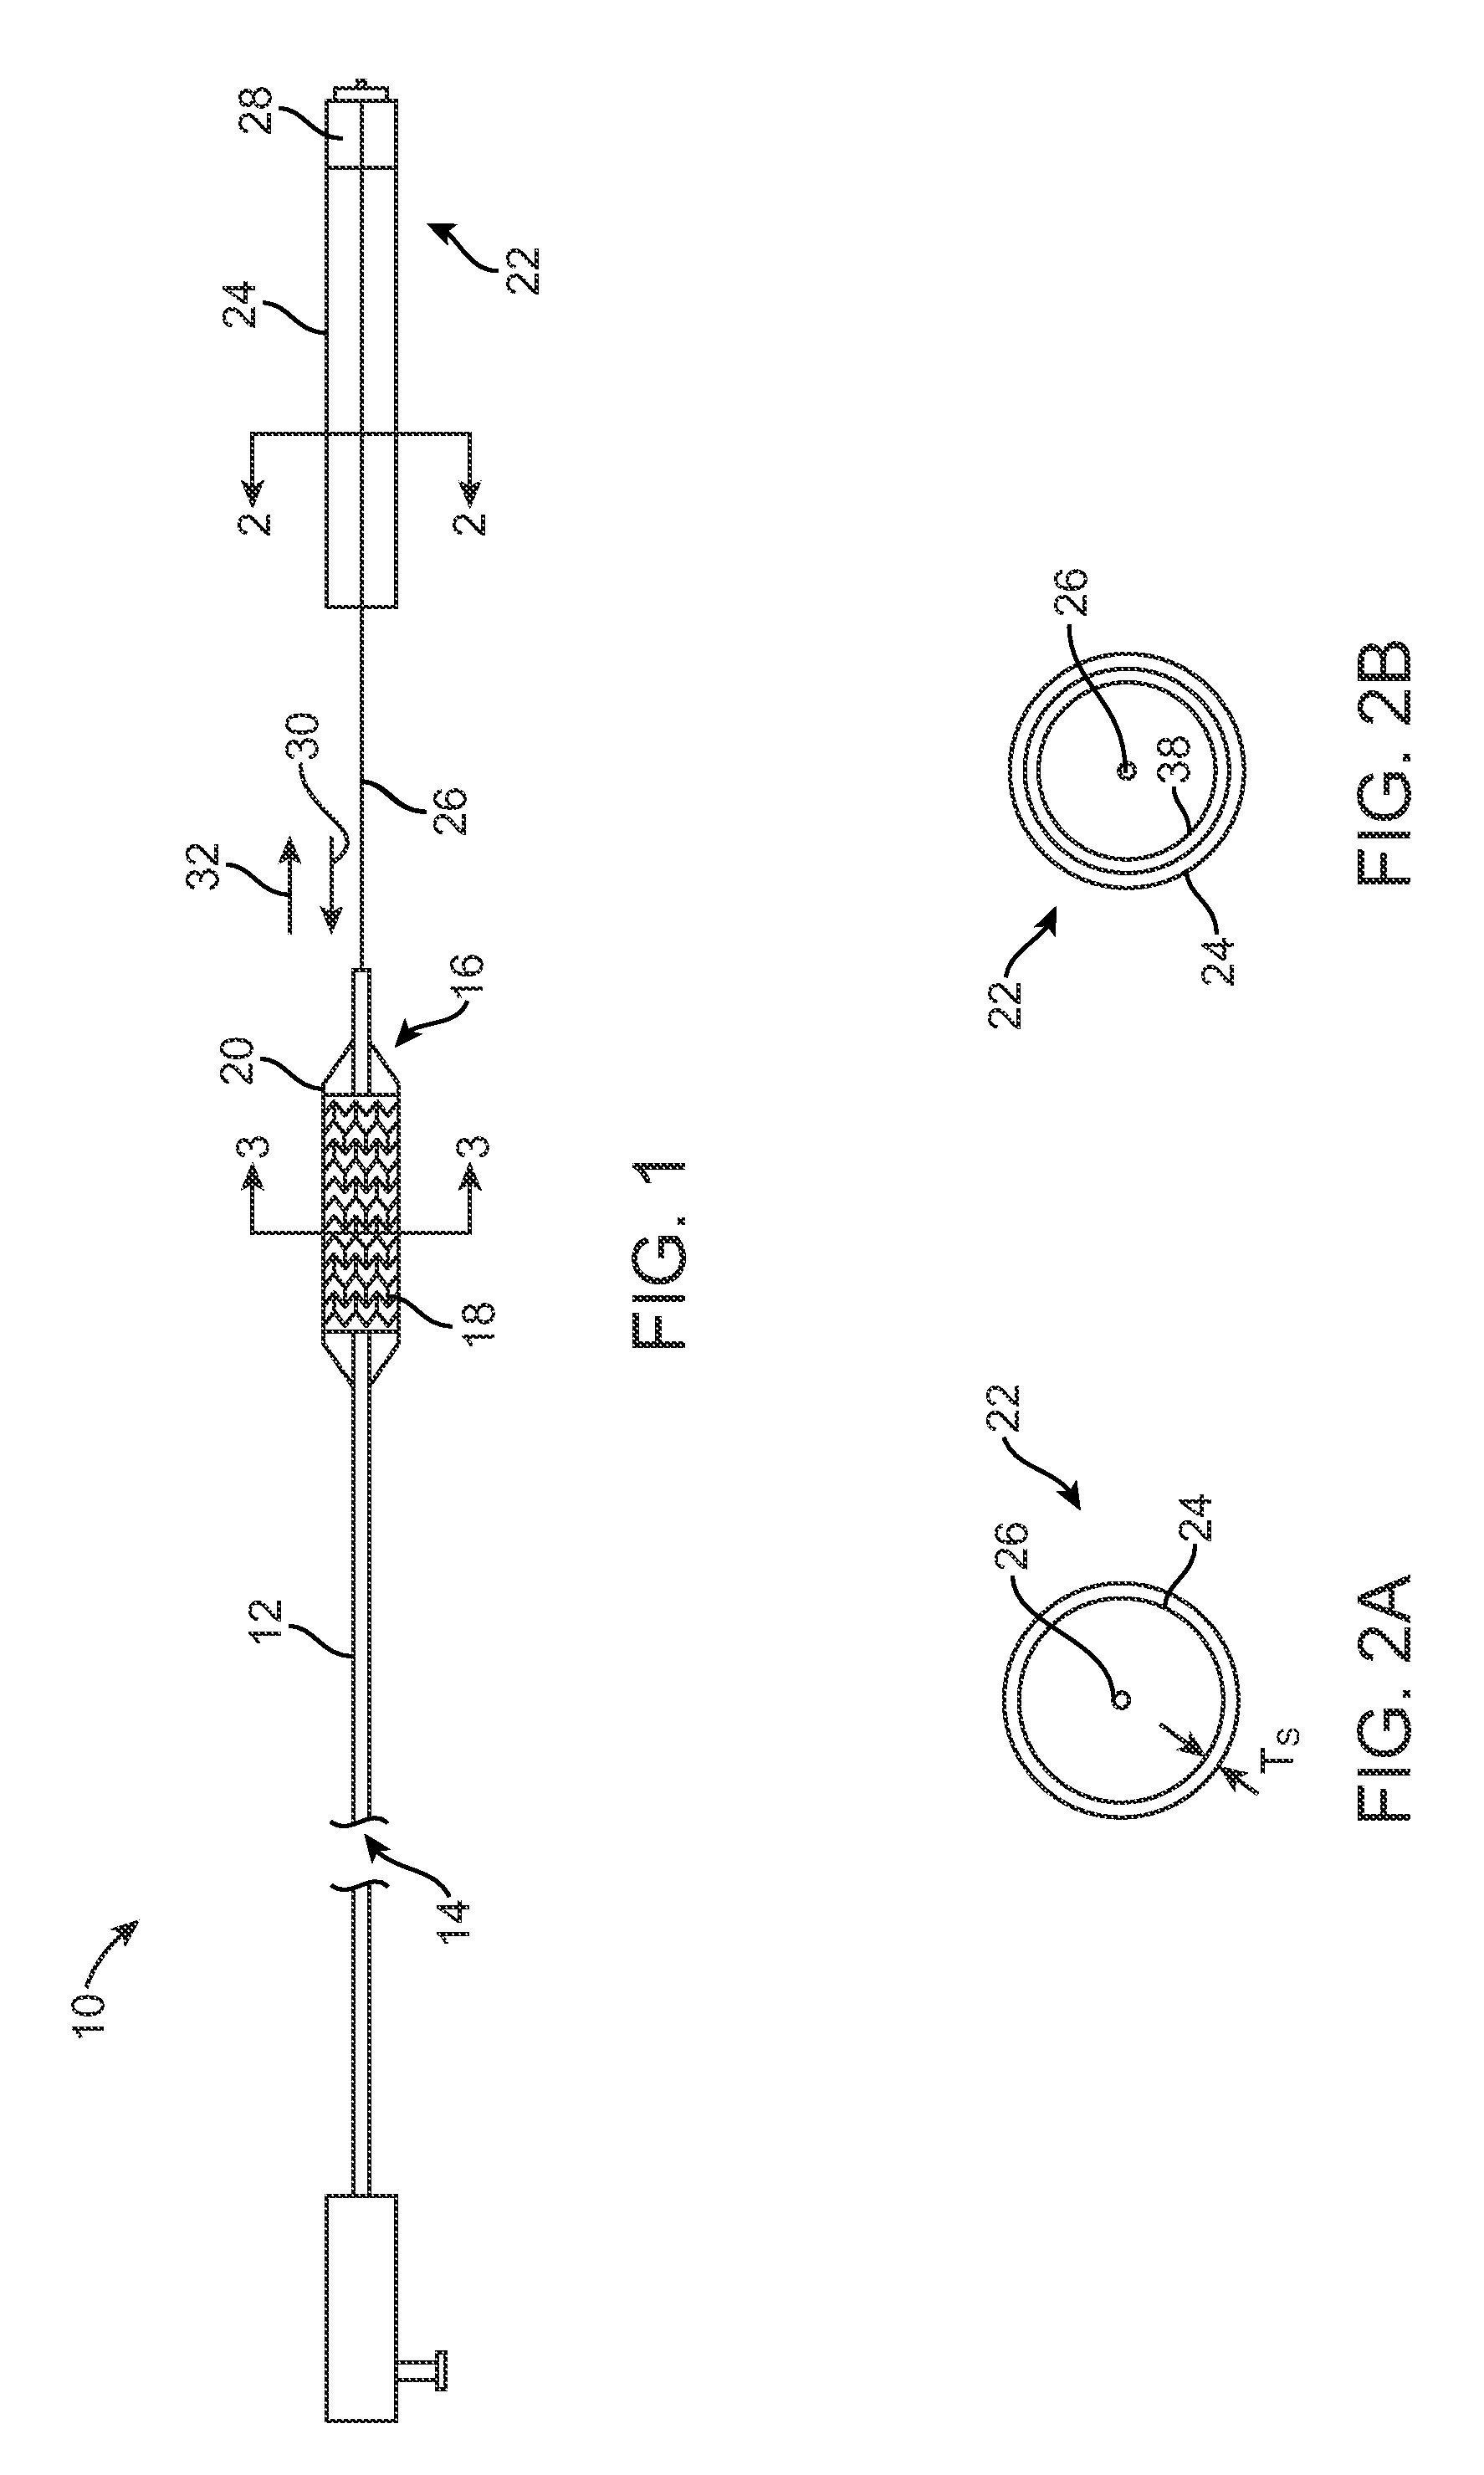 Drug diffusion barriers for a catheter assembly